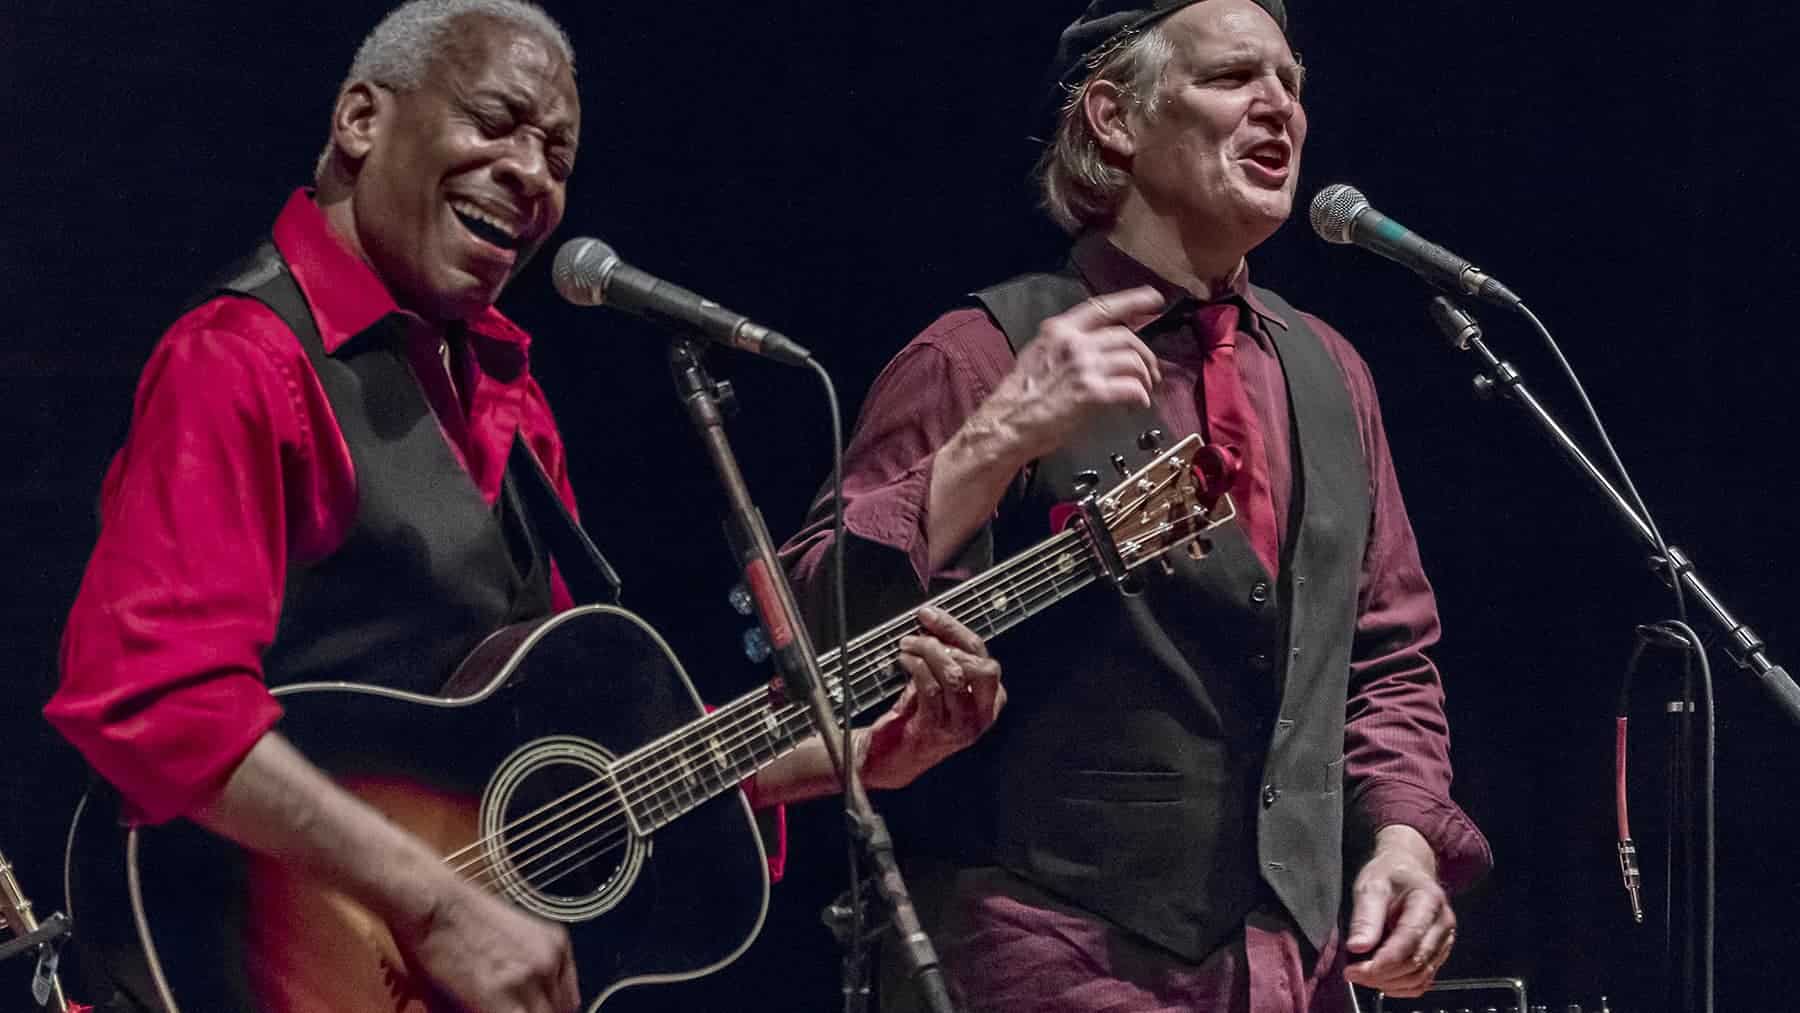 Awardwinning musicians Reggie Harris and Greg Greenway perform in concert together. Press photo courtesy of the artists and Mahaiwe Performing Arts center